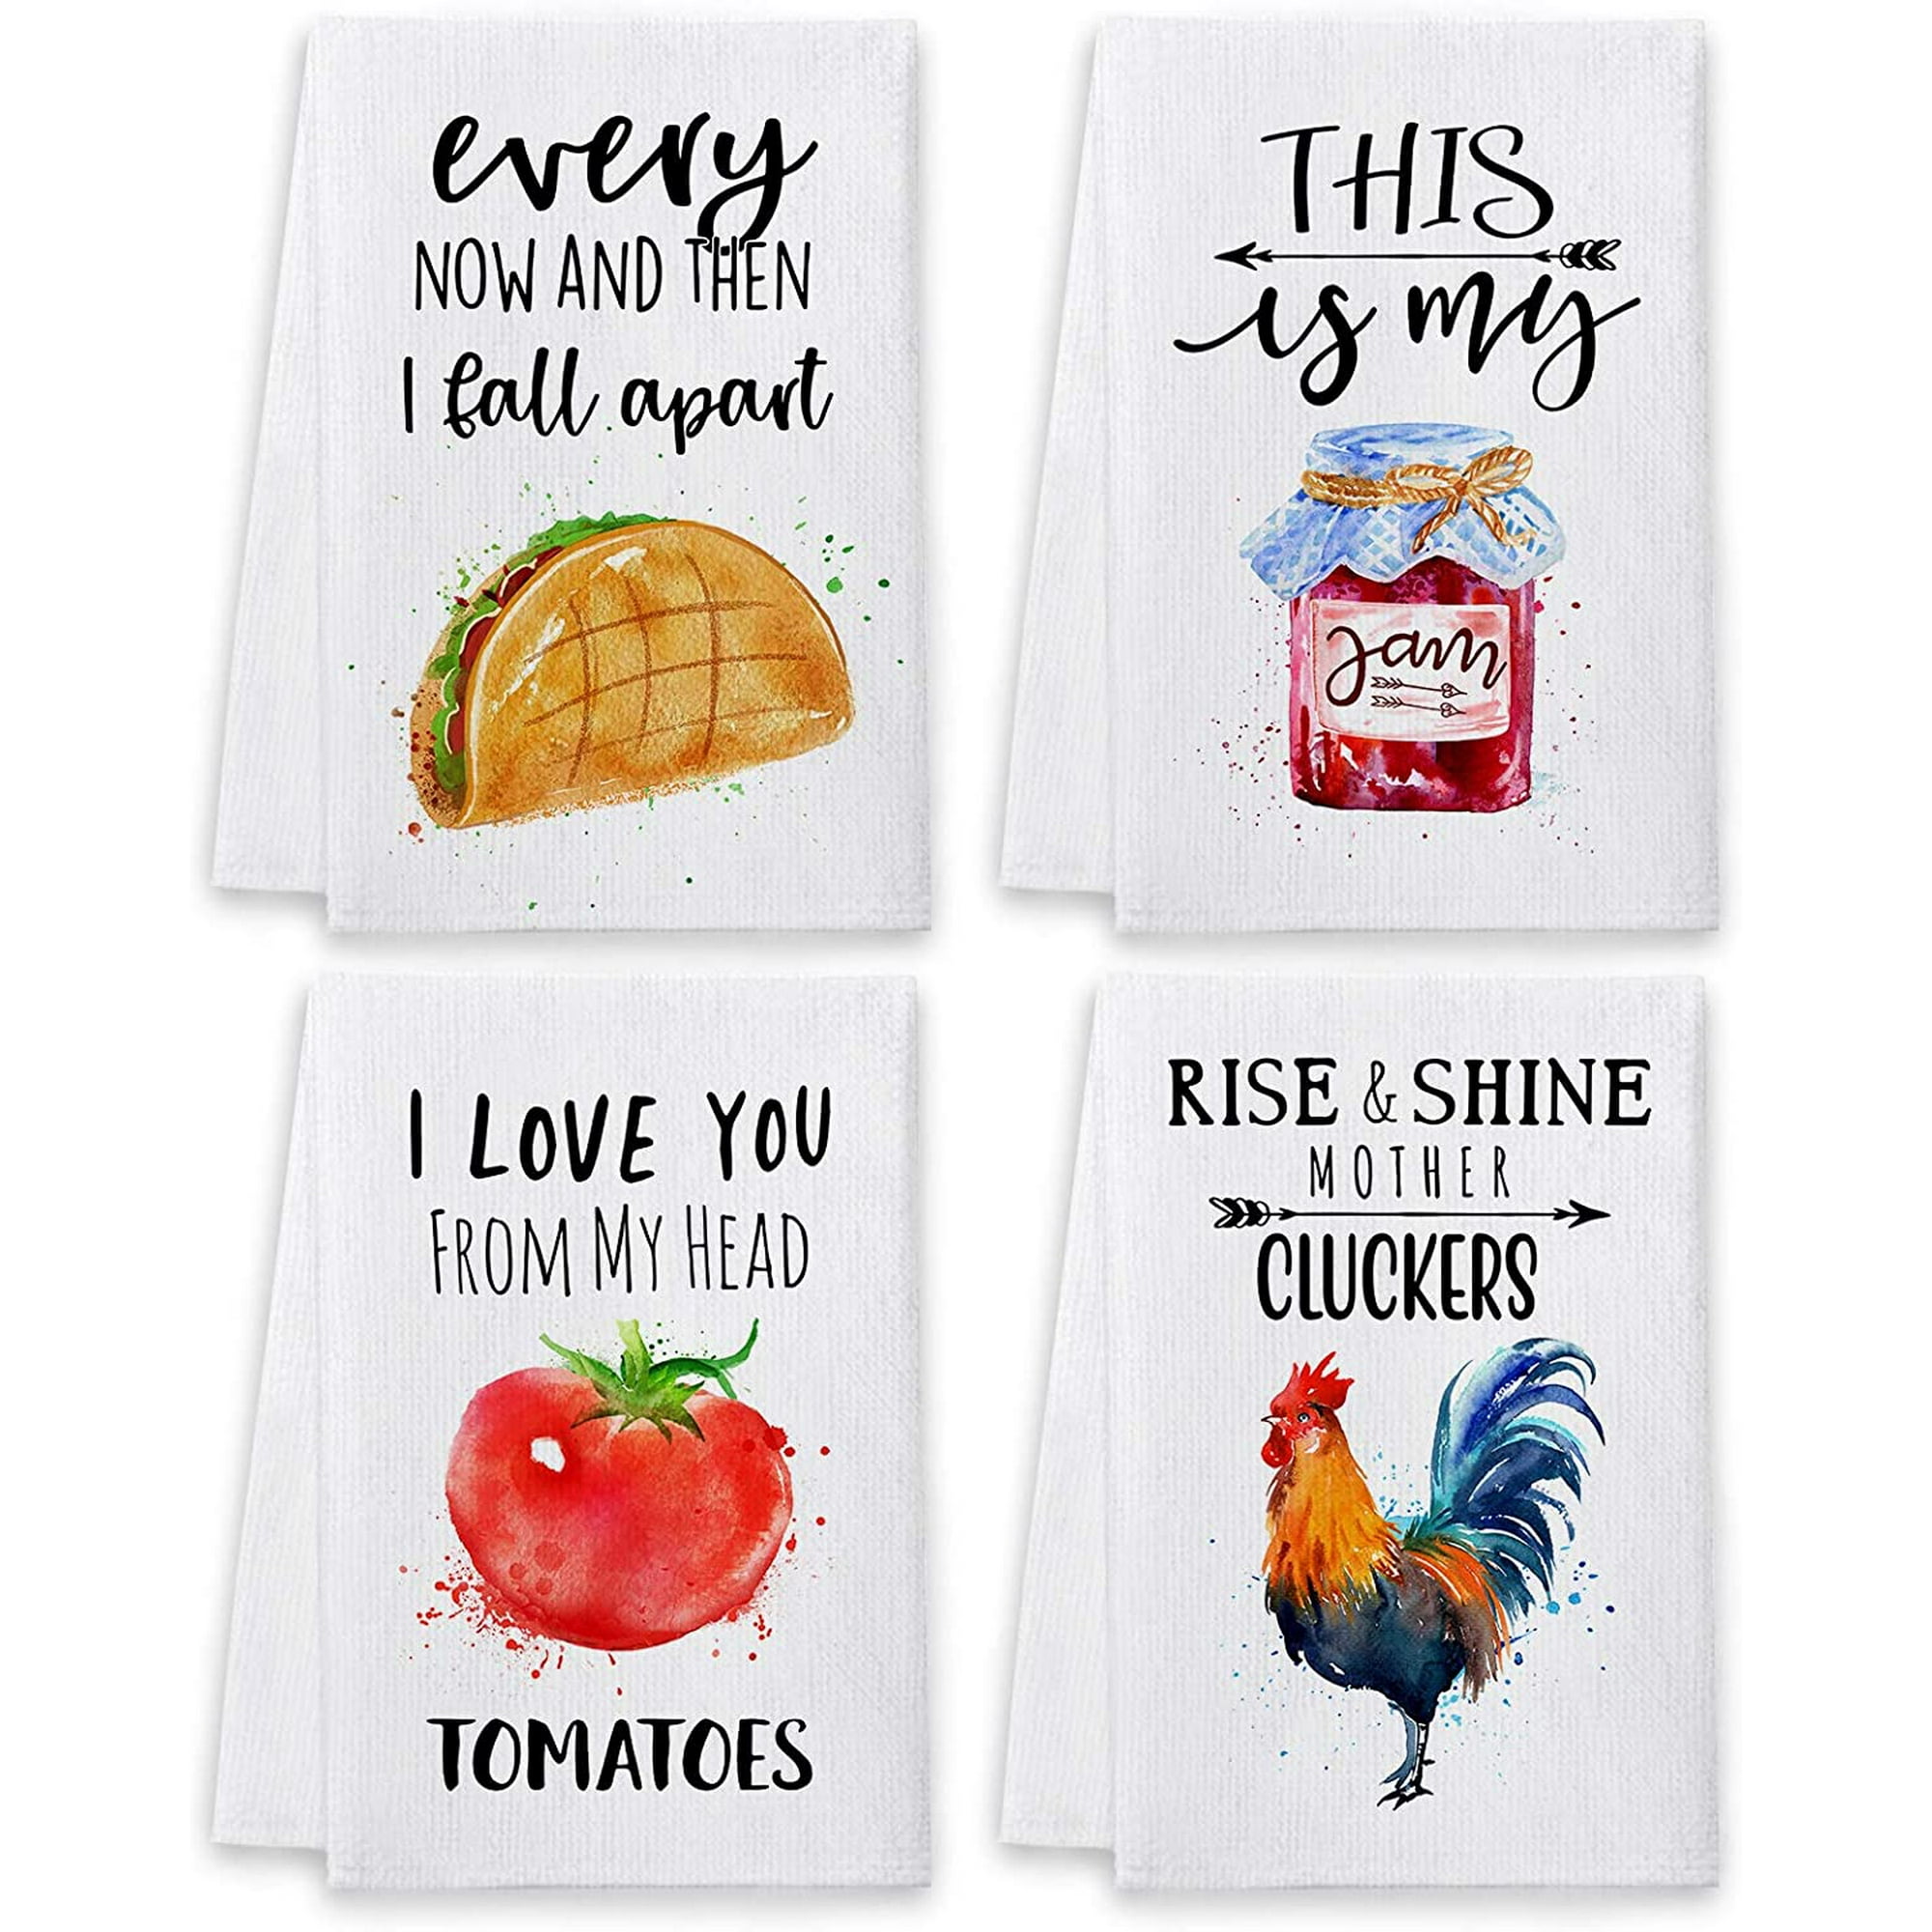 Funny Kitchen Towels and Dishcloths Sets of 4, Cute Quotes Dish Towels with  Sayings, Fun White Farmhouse Absorbent Tea Towels Housewarming Gifts Decor  Essentials for New Home | Walmart Canada